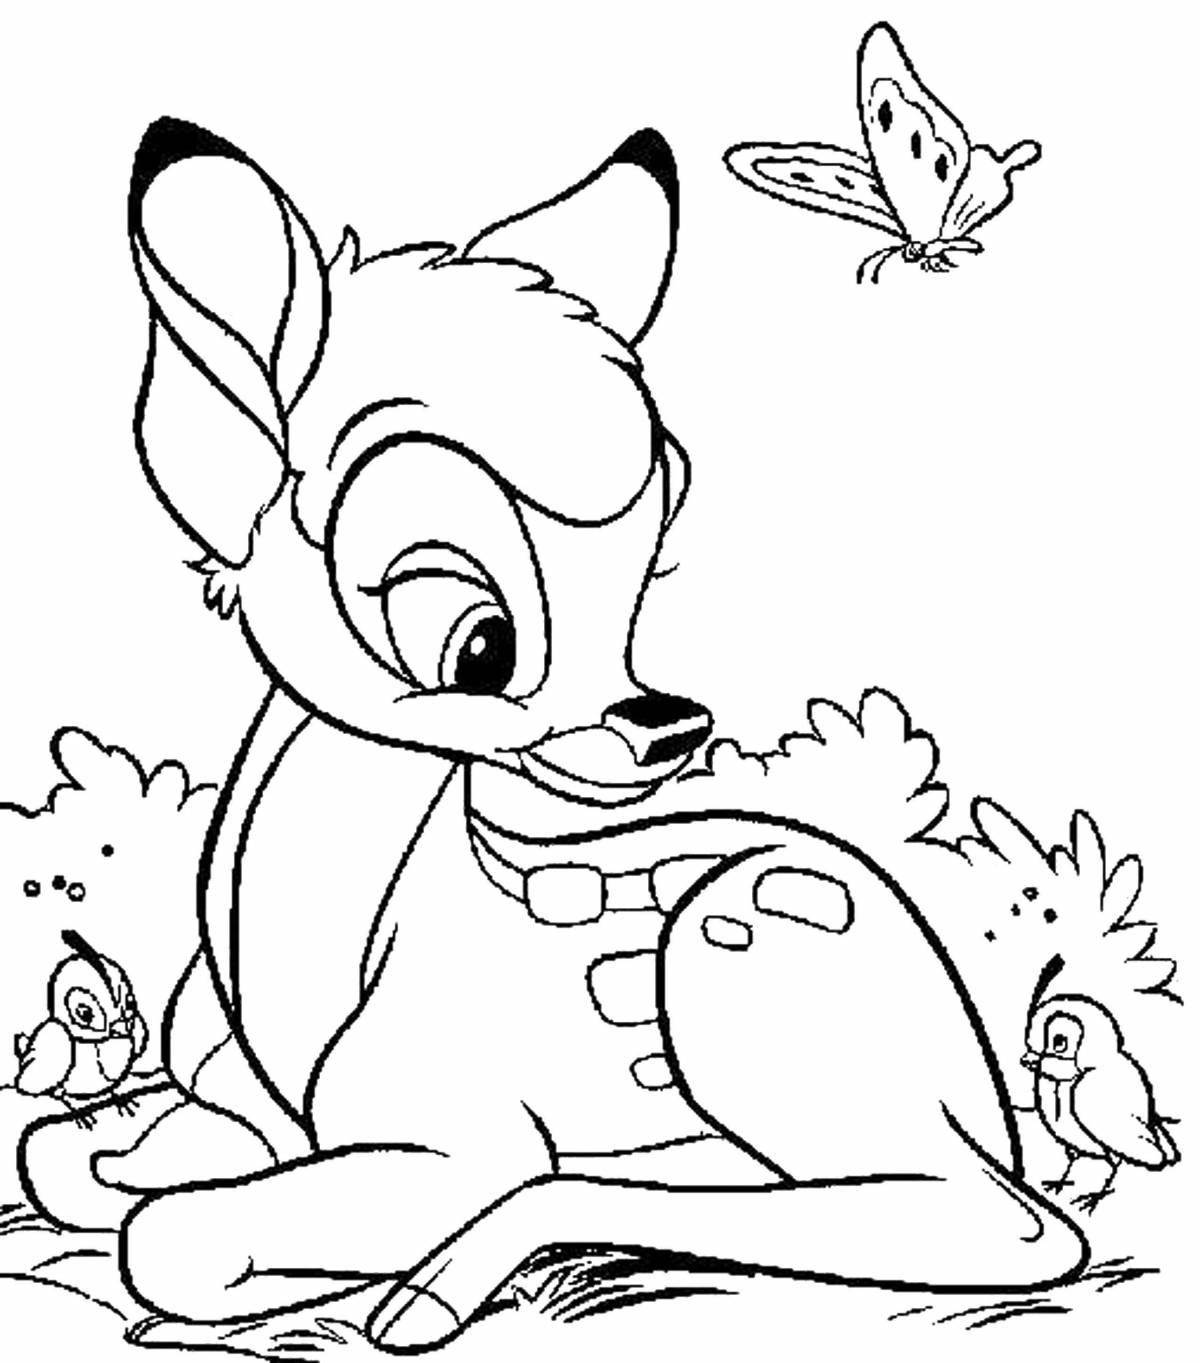 Color-bright coloring page full page for kids